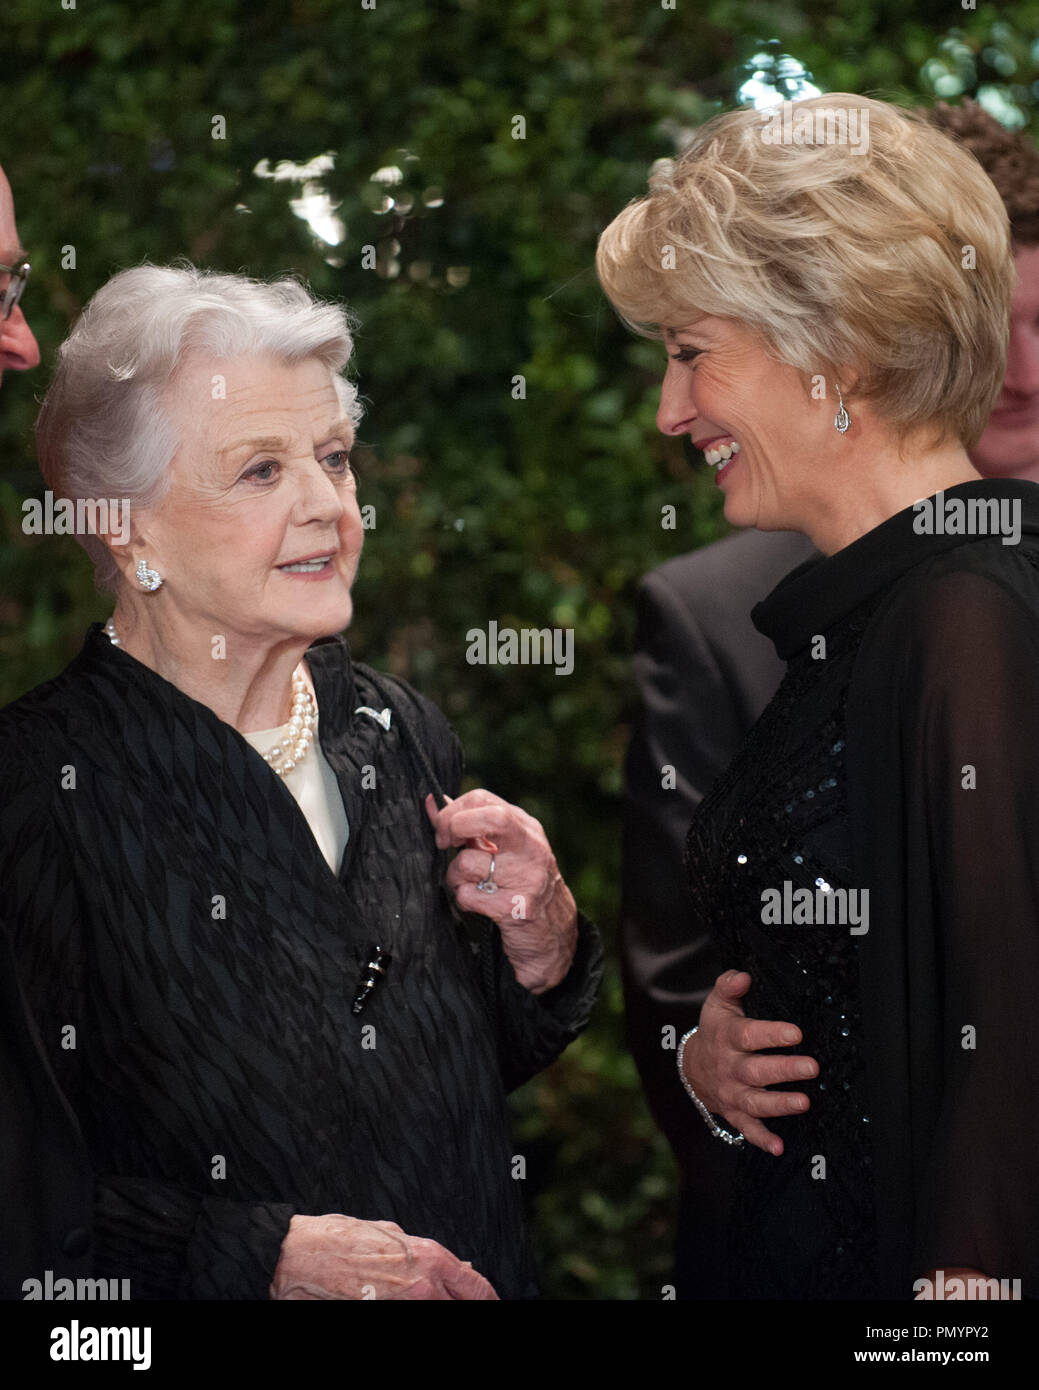 Honorary Award recipient Angela Lansbury  (left) and actress Emma Thompson attend the 5th Annual Governors Awards at The Ray Dolby Ballroom at Hollywood & Highland Center® in Hollywood, CA, on Saturday, November 16, 2013.  File Reference # 32184 029  For Editorial Use Only -  All Rights Reserved Stock Photo